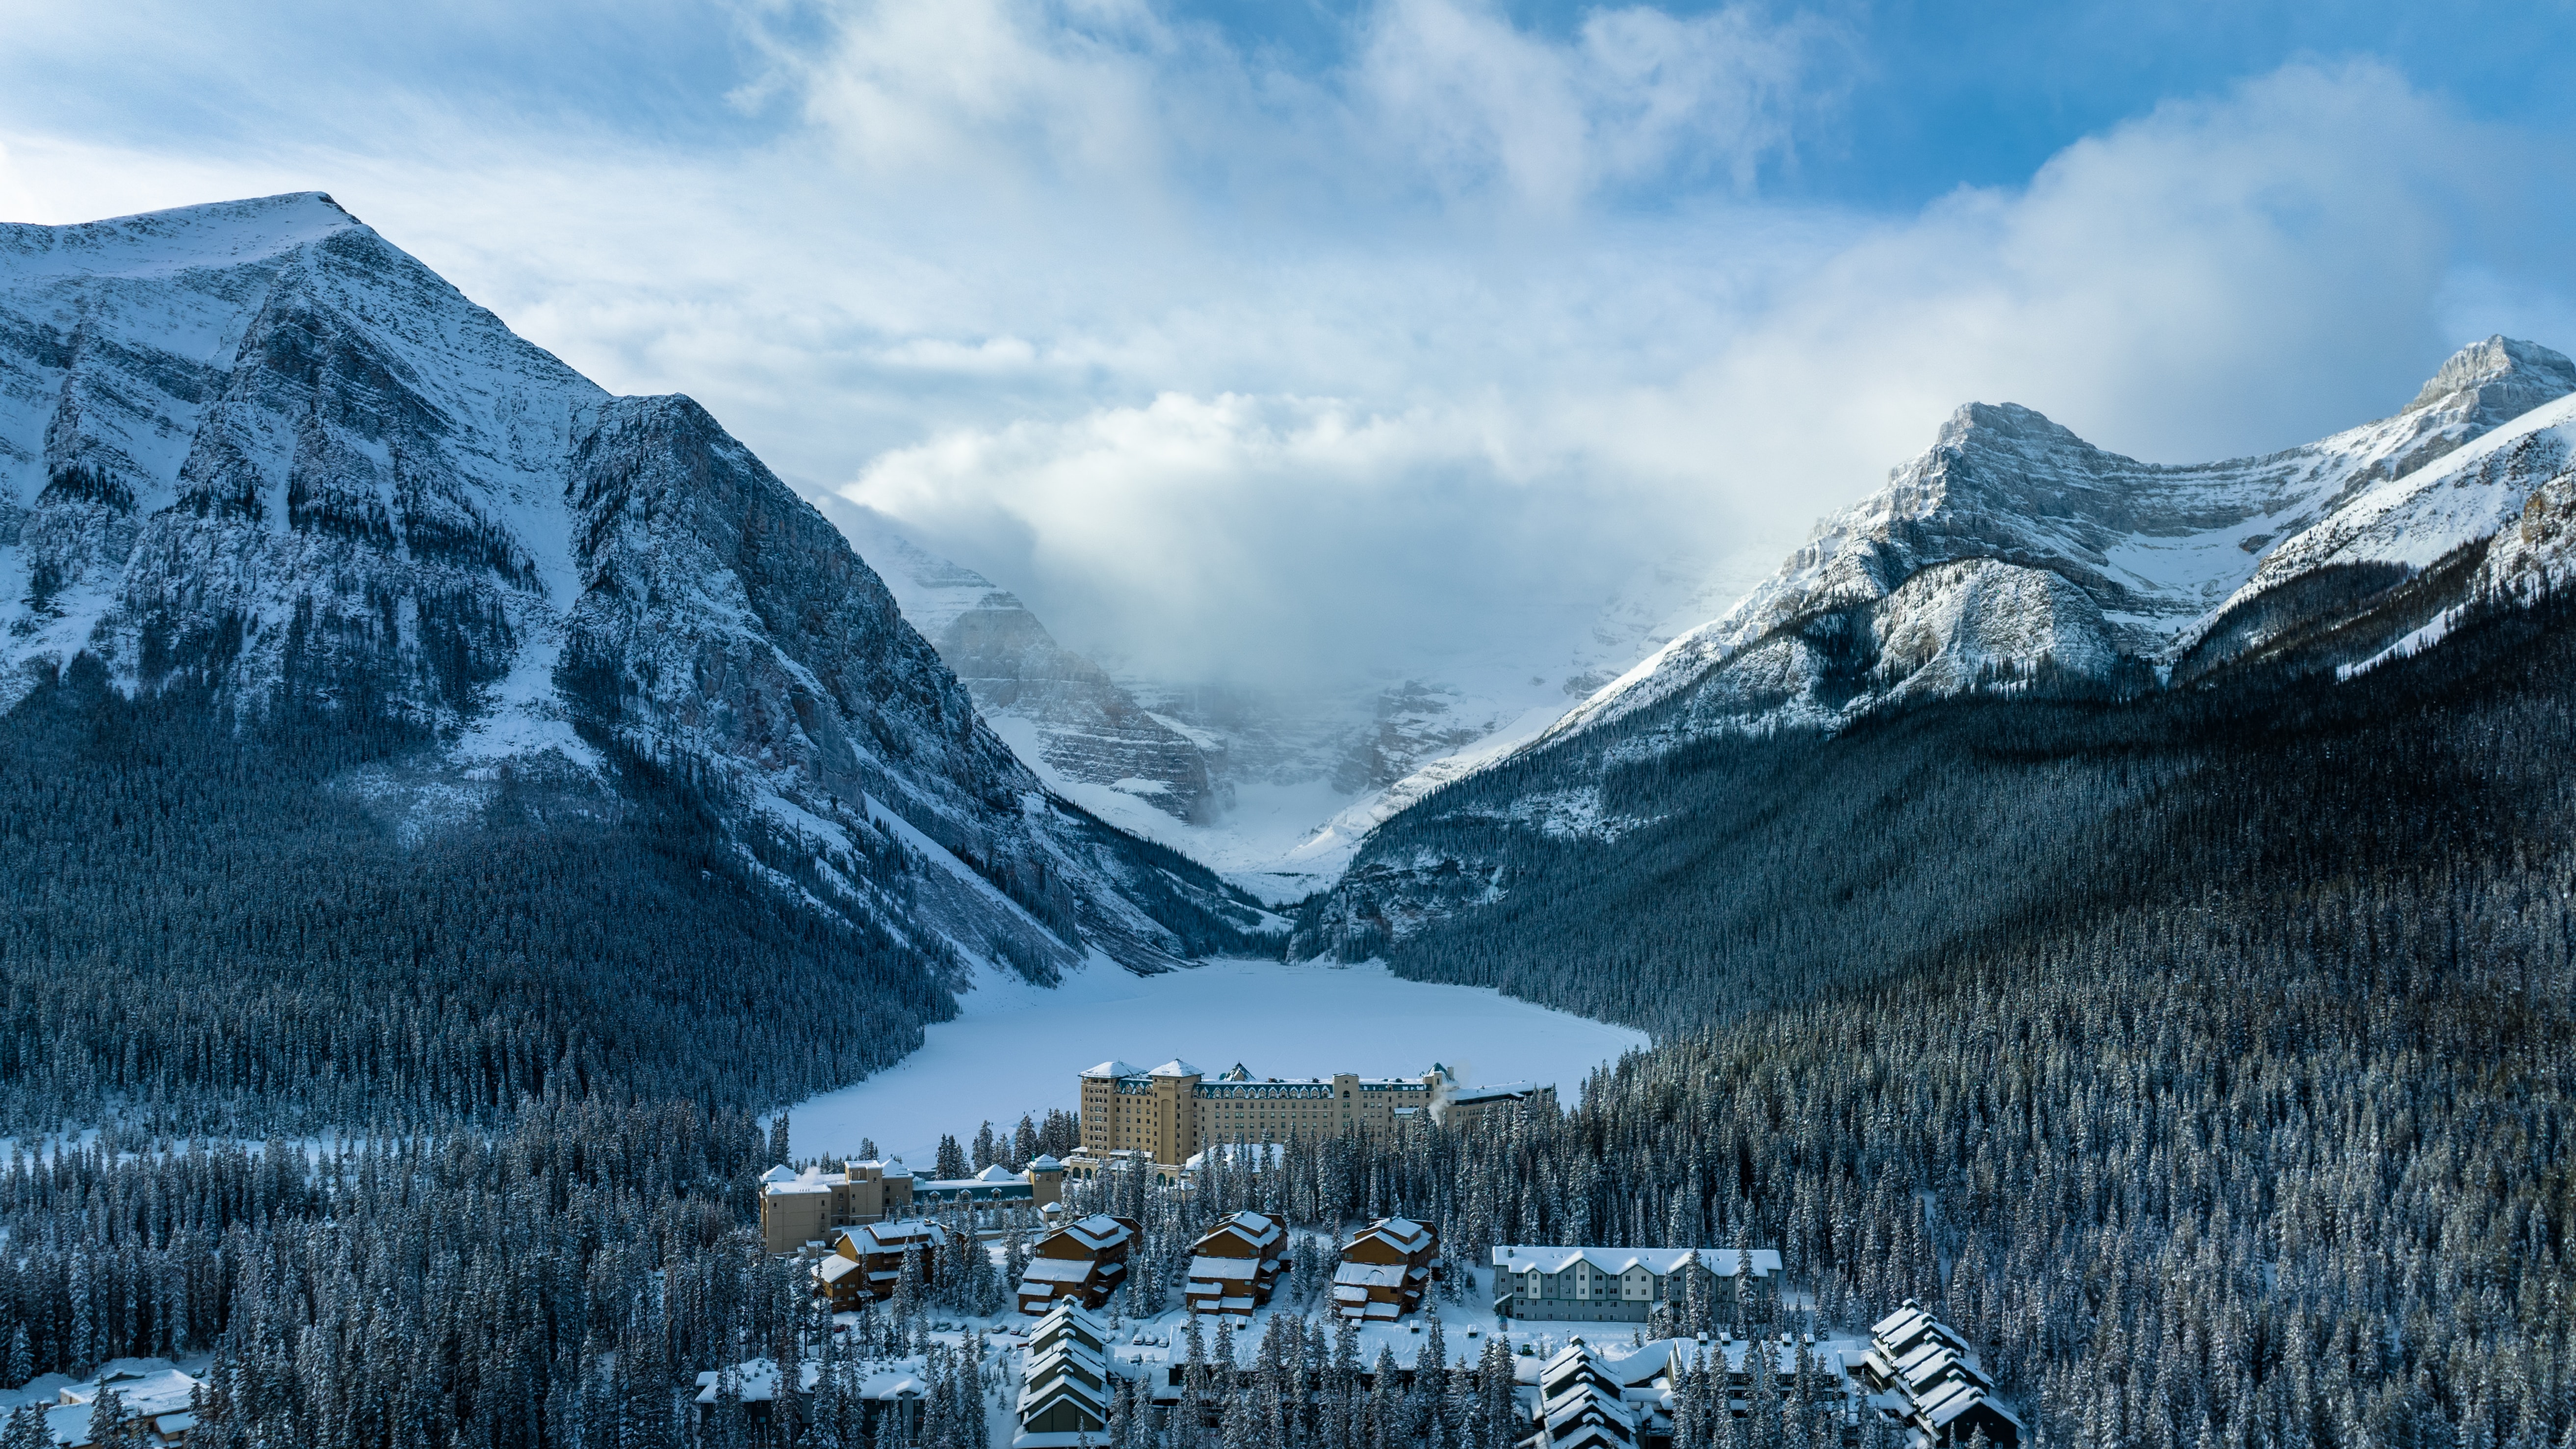 4-day Winter Rocky Mountain Tour, Calgary in Vancouver out,  free time in Banff Town, Banff Gondola + Hot Springs, winter wonderland Lake Louise